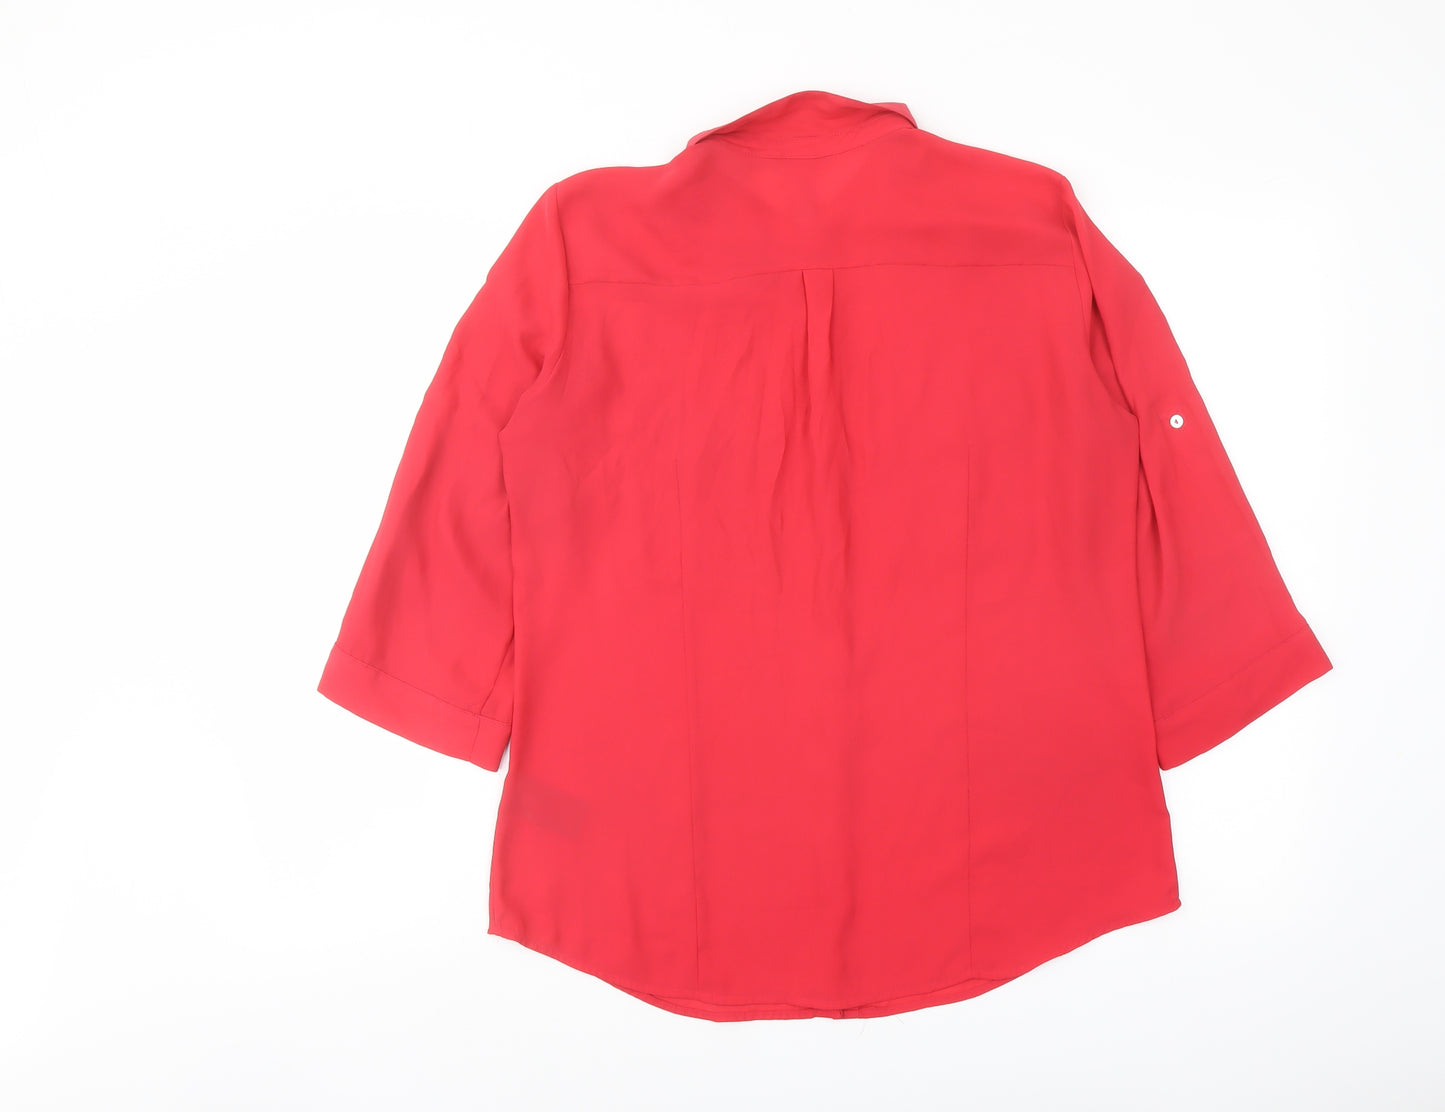 H&M Womens Pink Polyester Basic Button-Up Size 12 Collared